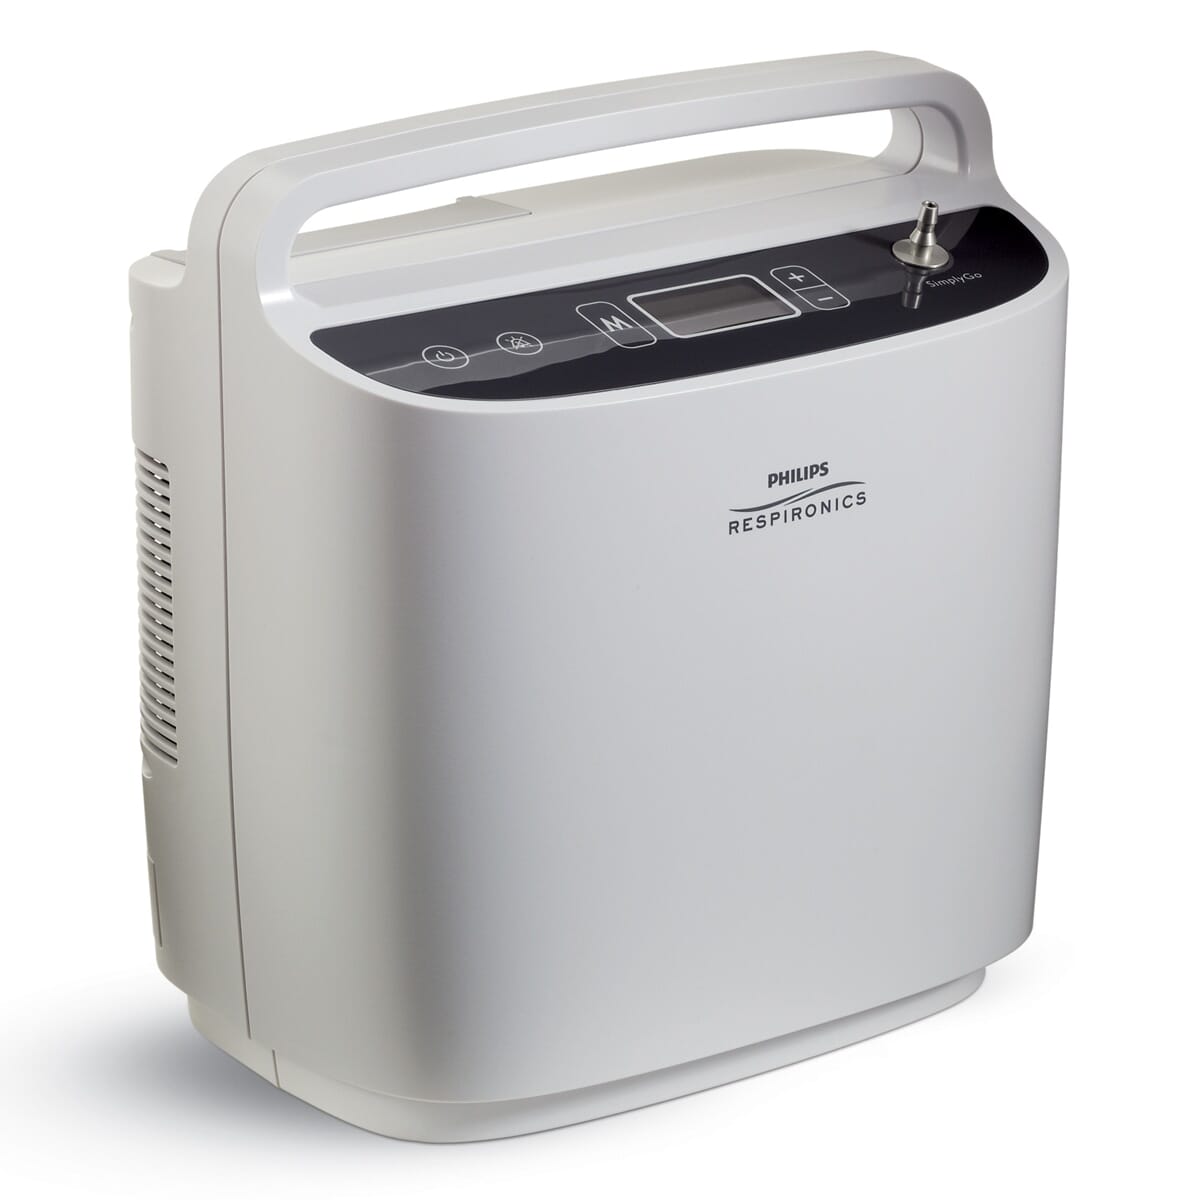 What is the Best Portable Oxygen Concentrator in 2019?